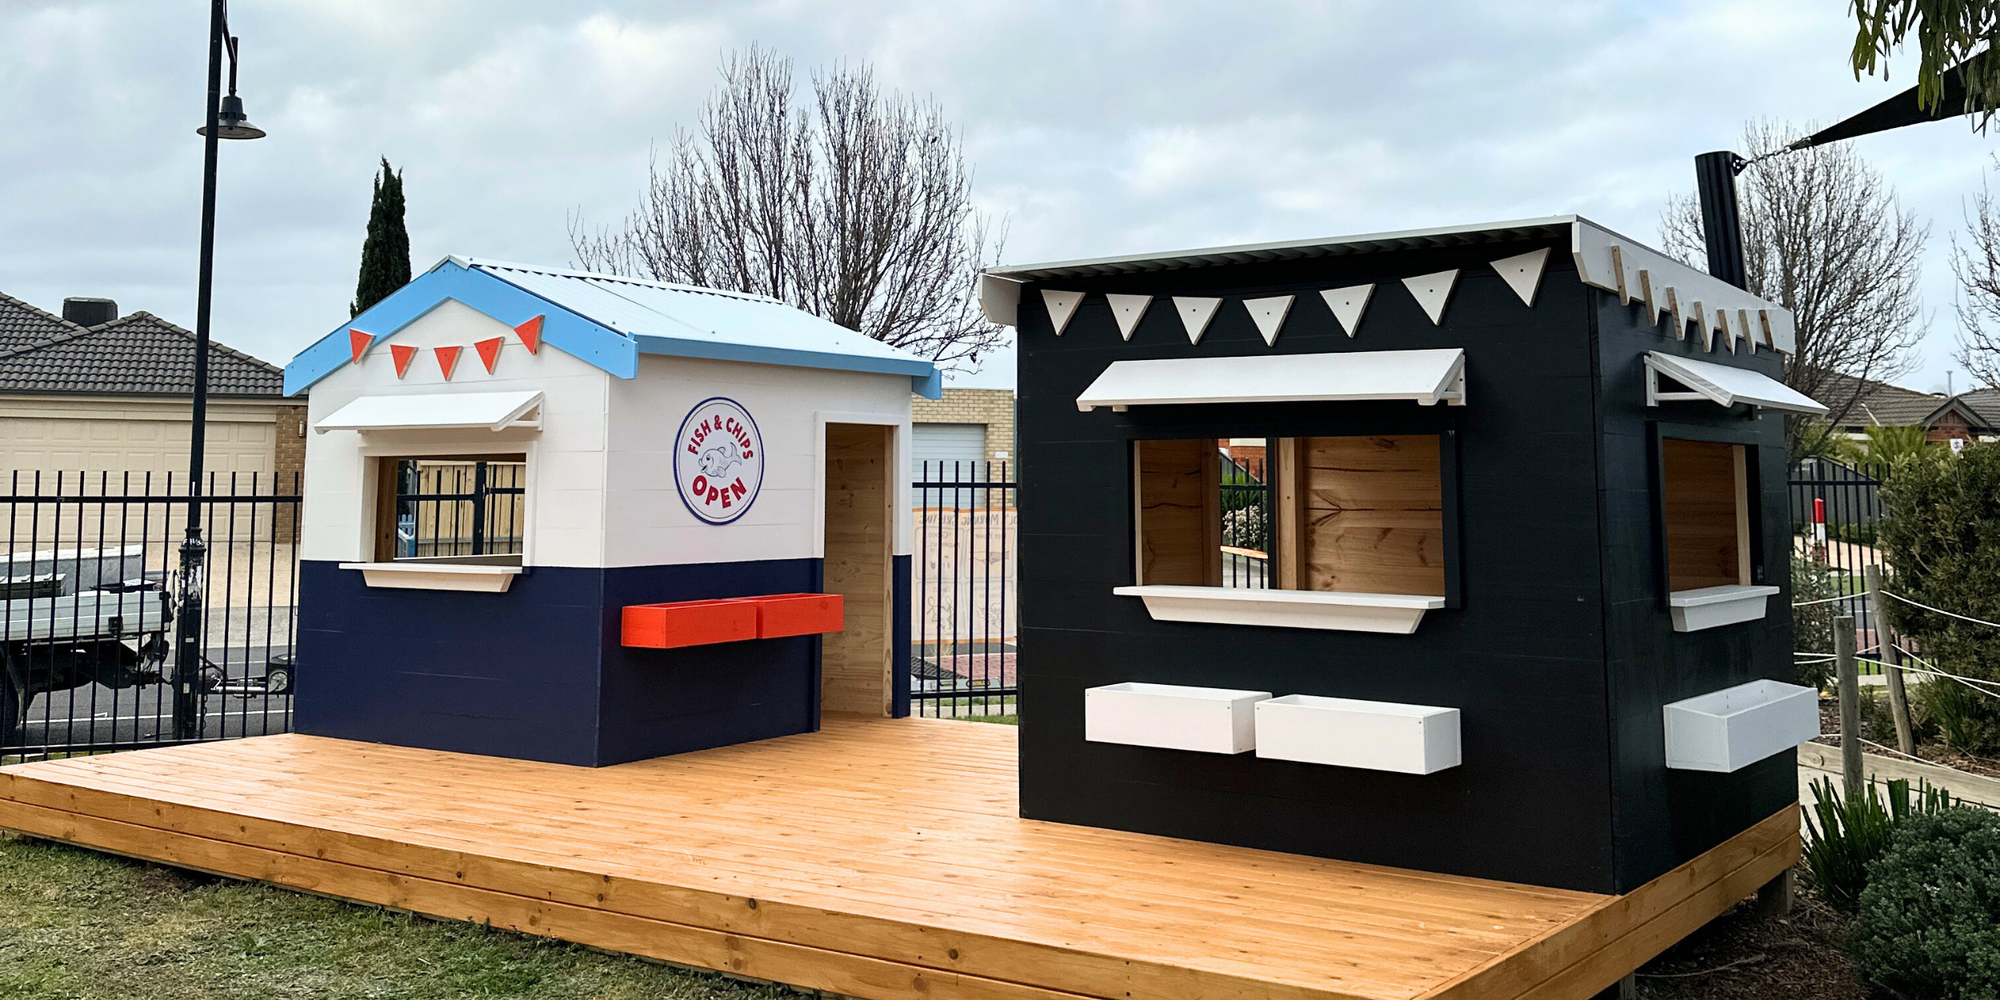 Image of 2 timber cubby houses styled as a Fish n Chip shop and Farmers market. Installed at Derrimut Primary School in Victoria